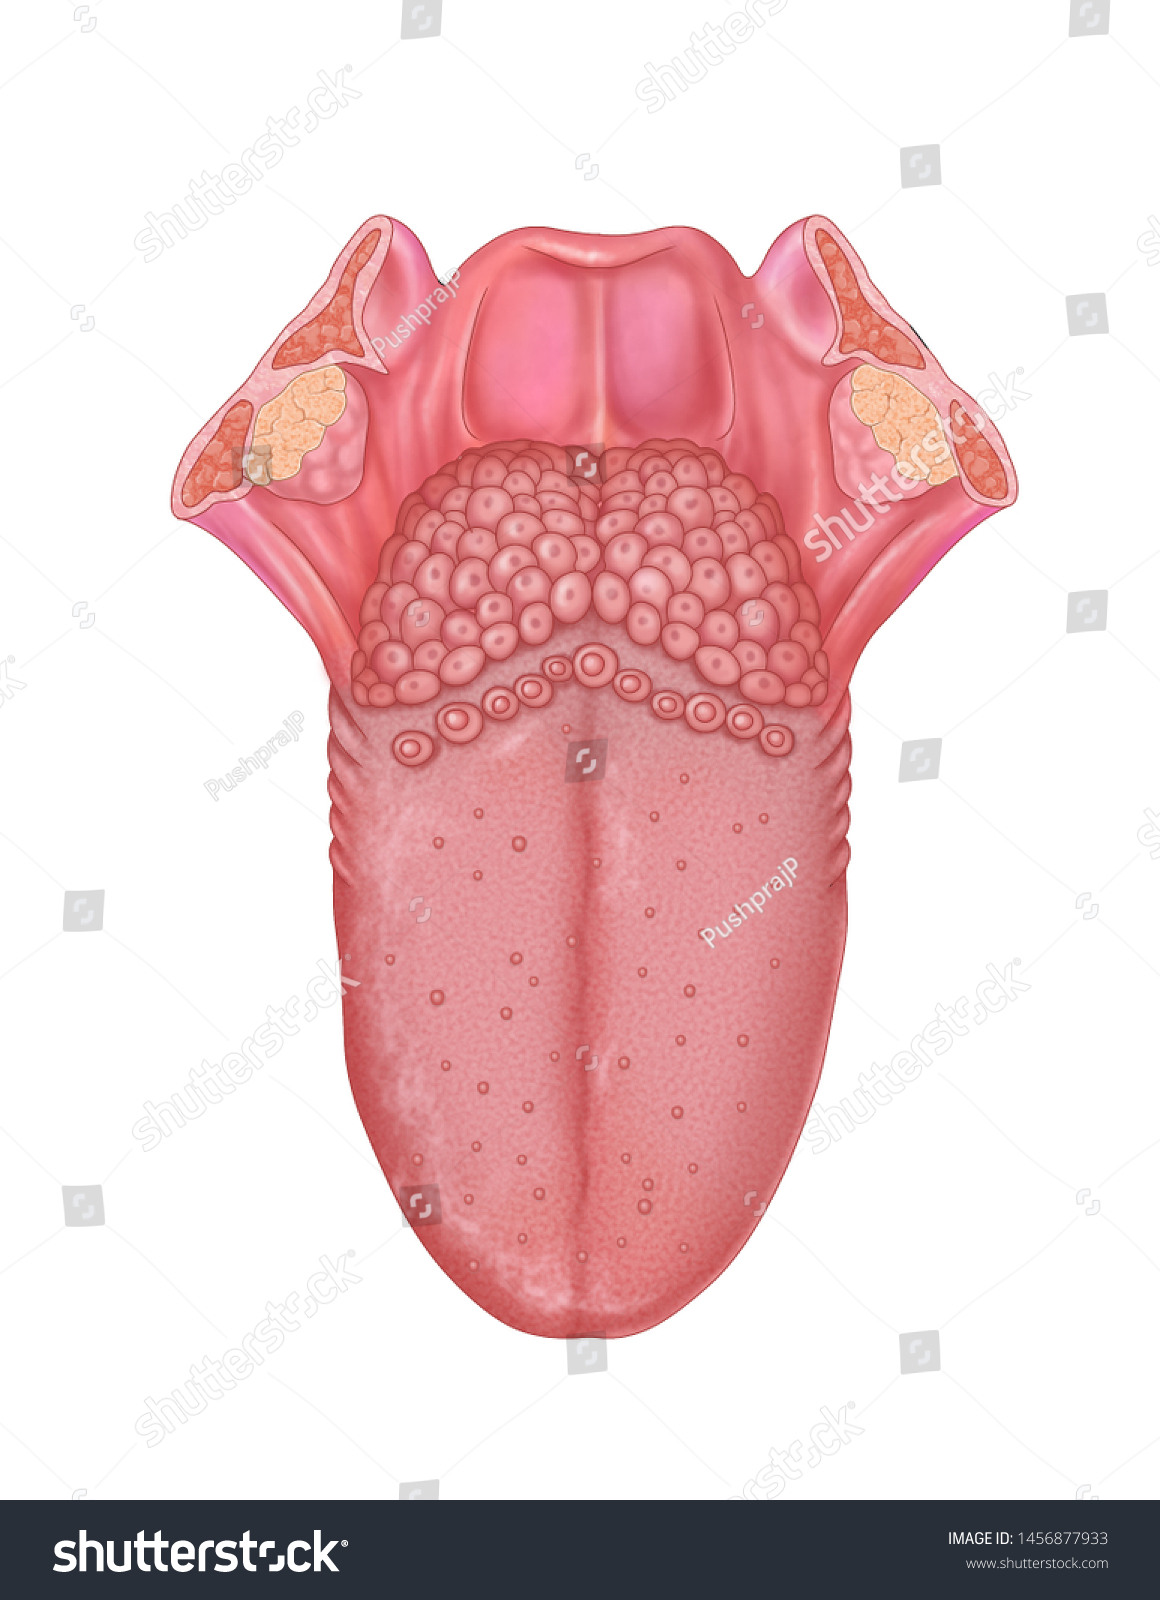 Illustration Dorsal Surface Tongue Taste Buds Stock Illustration 1456877933 Actually, taste buds are everywhere, from the roof of your mouth to your throat, nose and sinuses. https www shutterstock com image illustration illustration dorsal surface tongue taste buds 1456877933